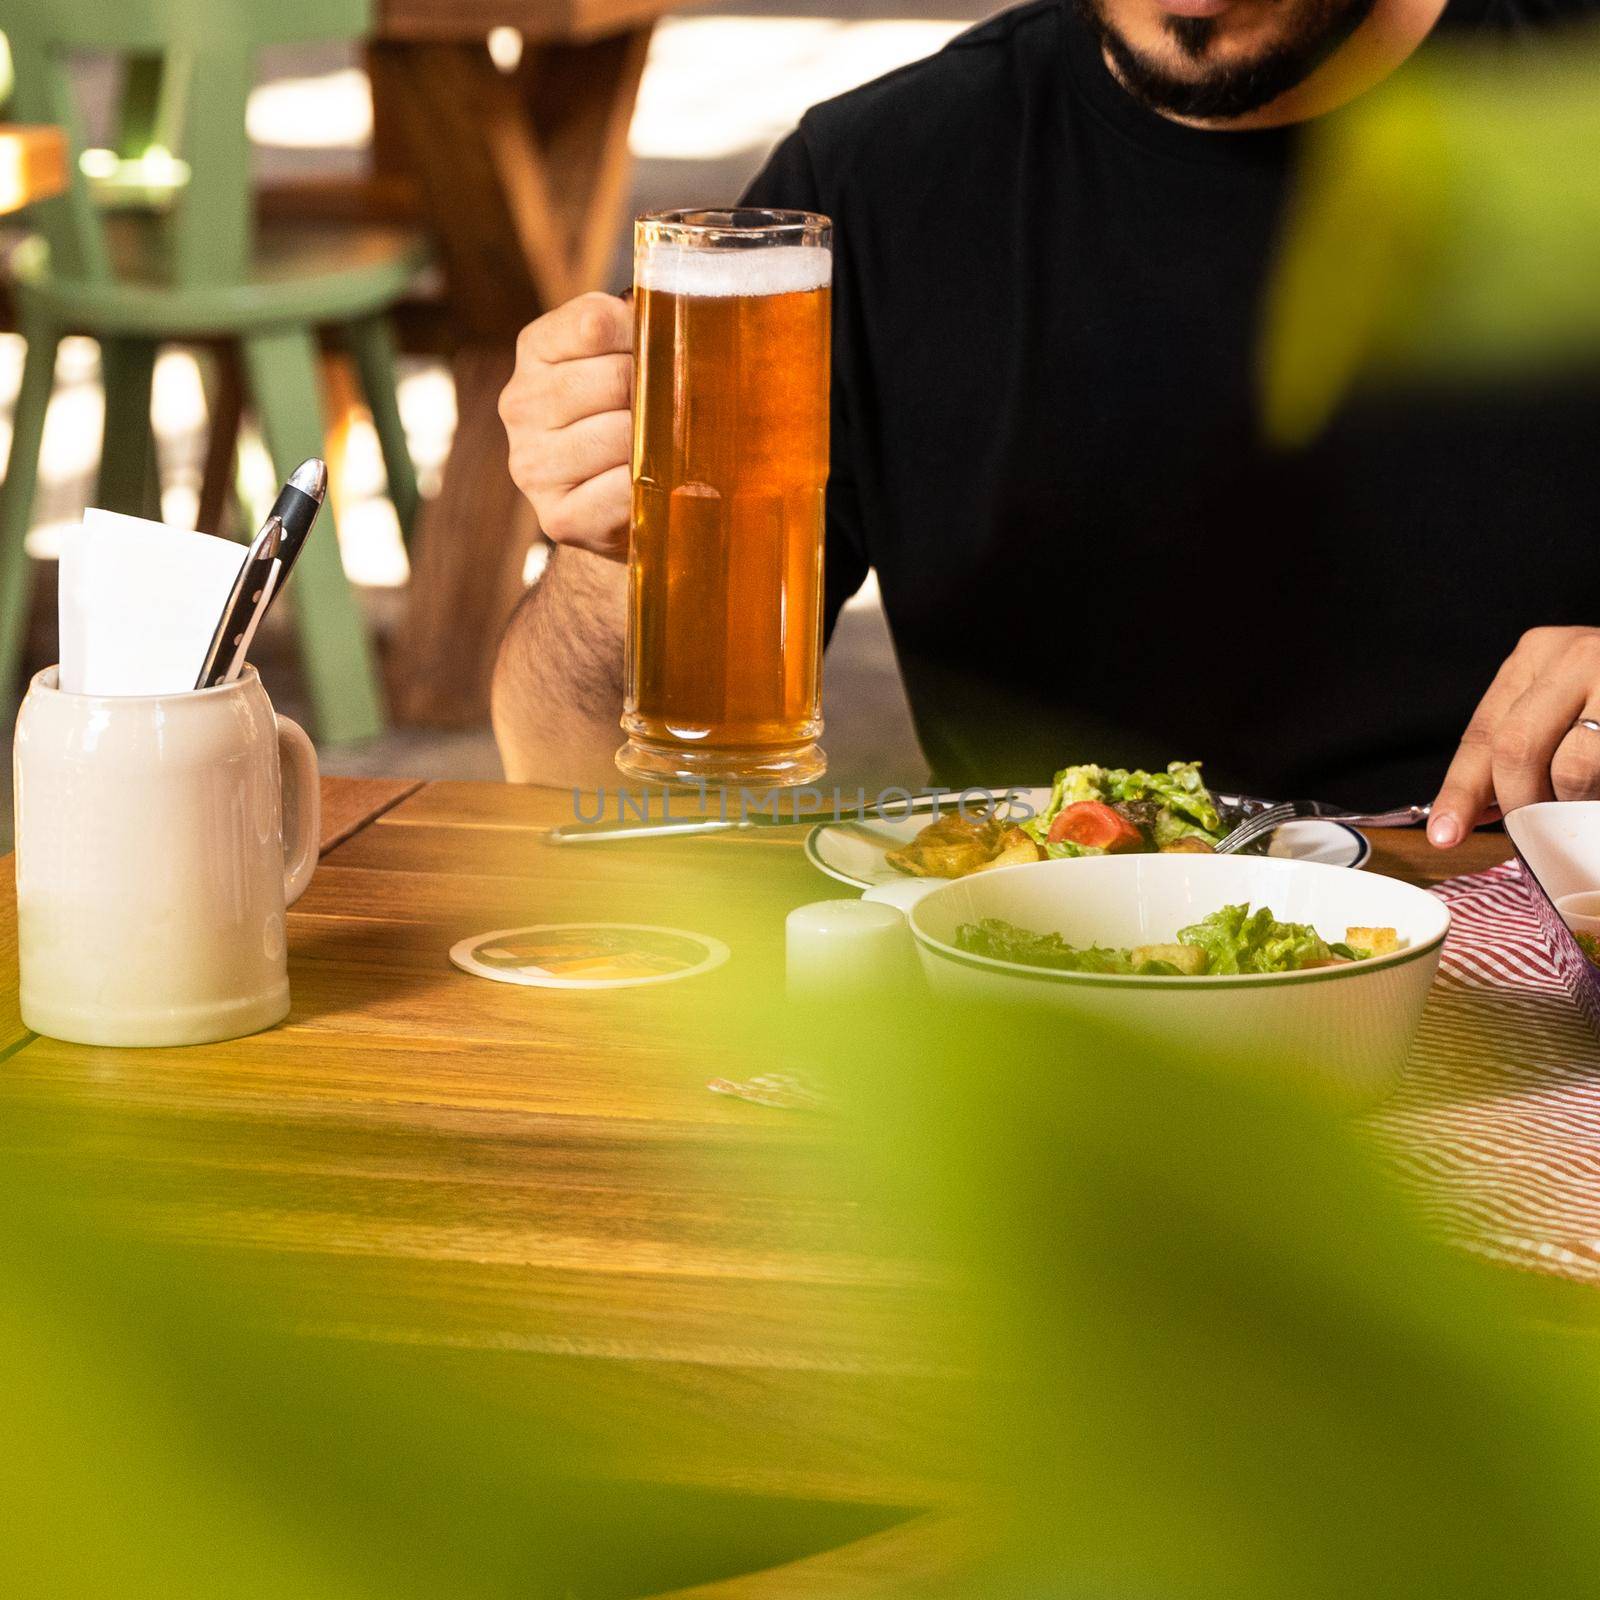 Man drinking beer with salad